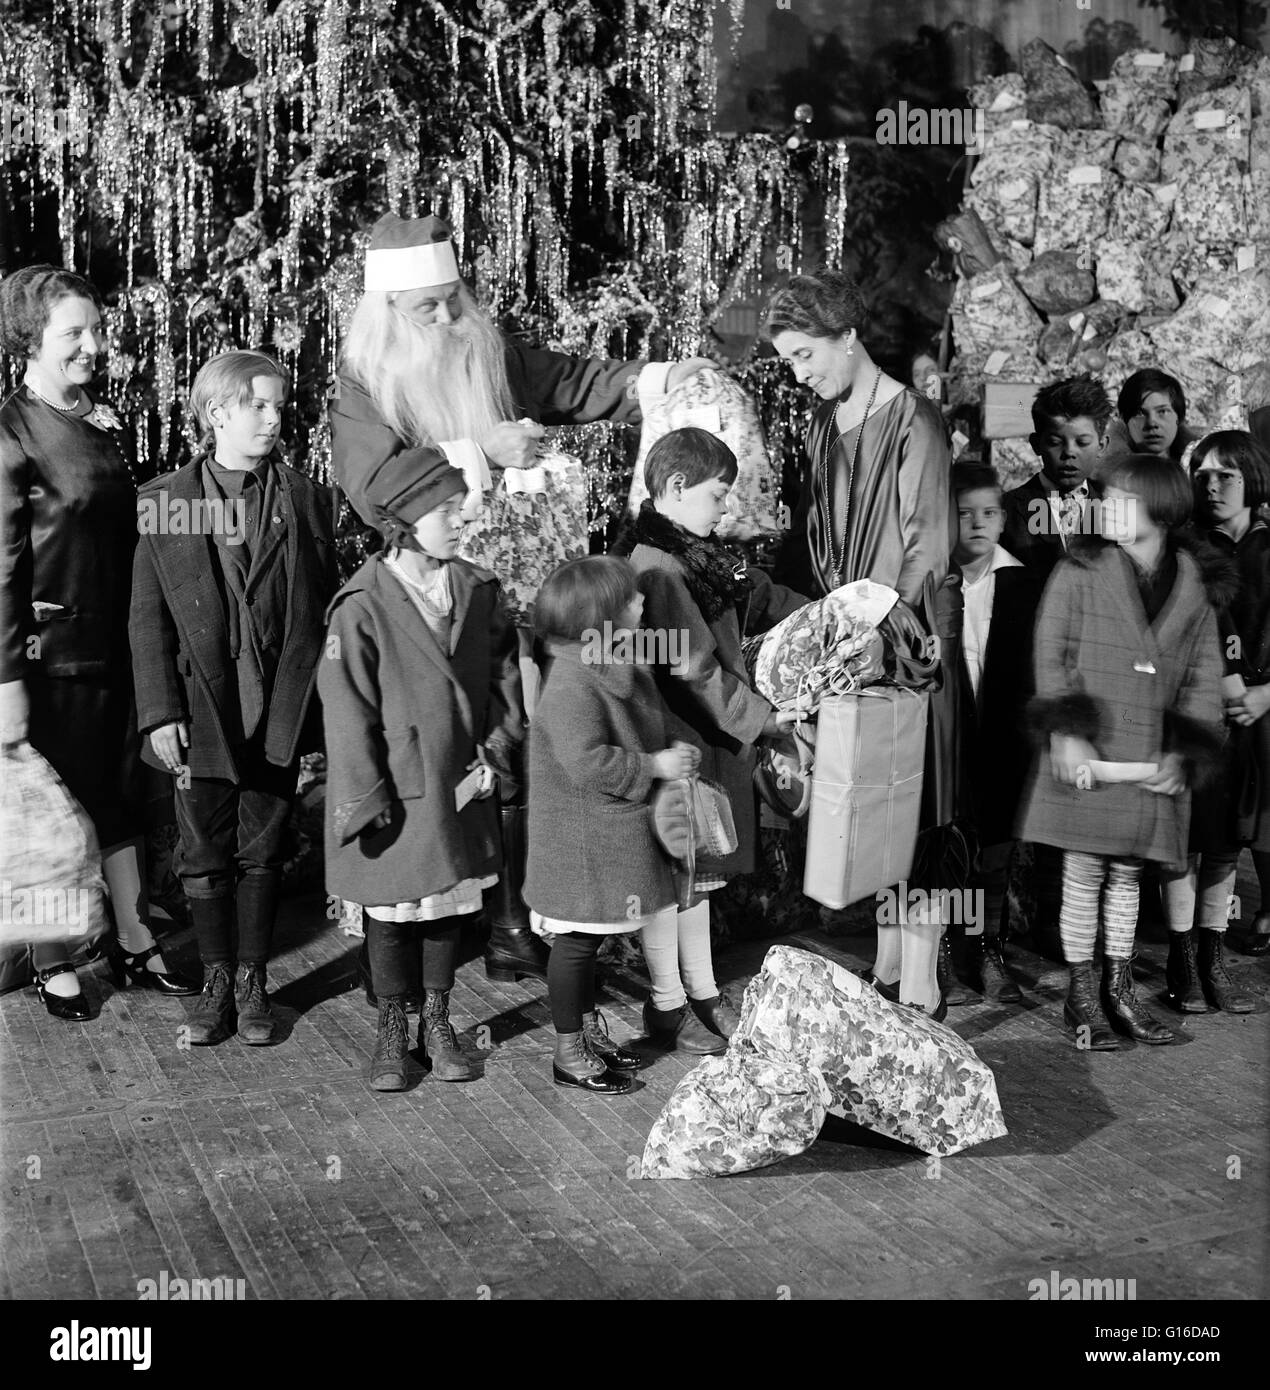 Entitled: 'Grace Coolidge, Santa Claus, and children next to Christmas tree.' Grace Anna Goodhue Coolidge (January 3, 1879 - July 8, 1957) was the wife of Calvin Coolidge and First Lady of the United States from 1923 to 1929. She graduated from the Univer Stock Photo